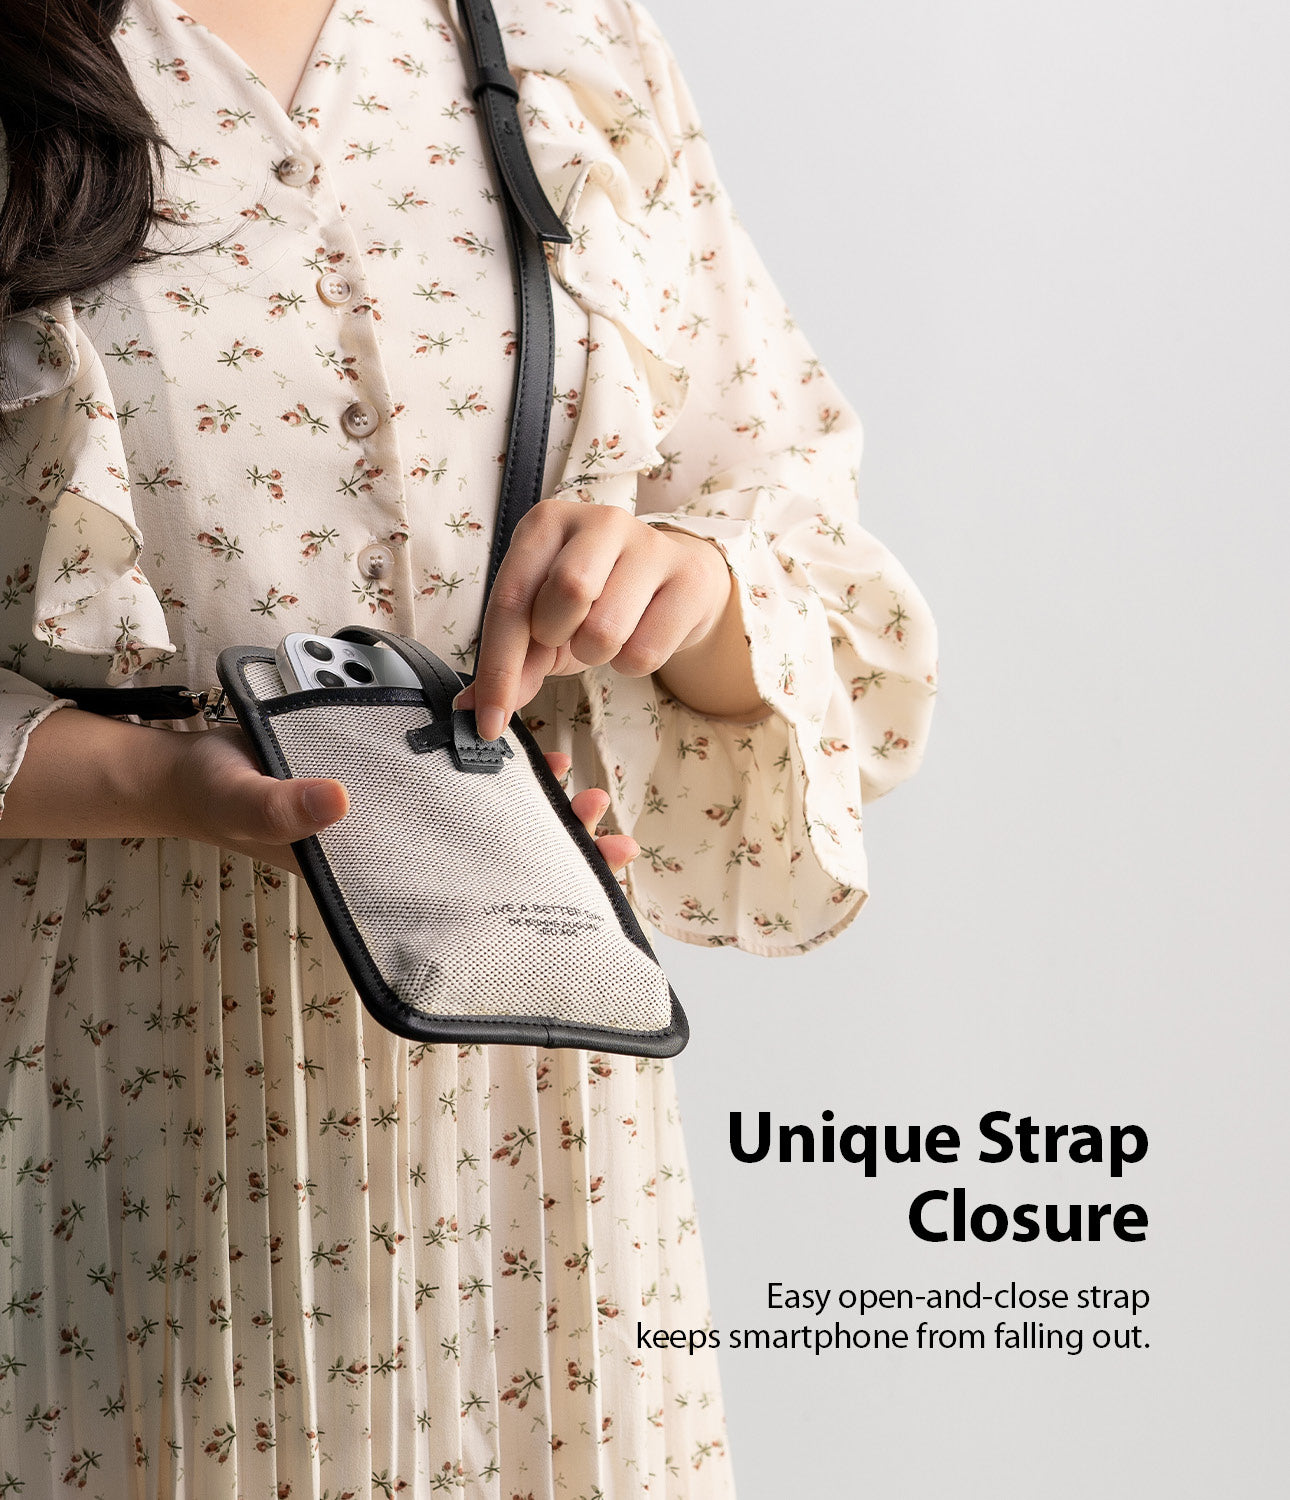 easy open and clos strap keeps smartphone from falling out